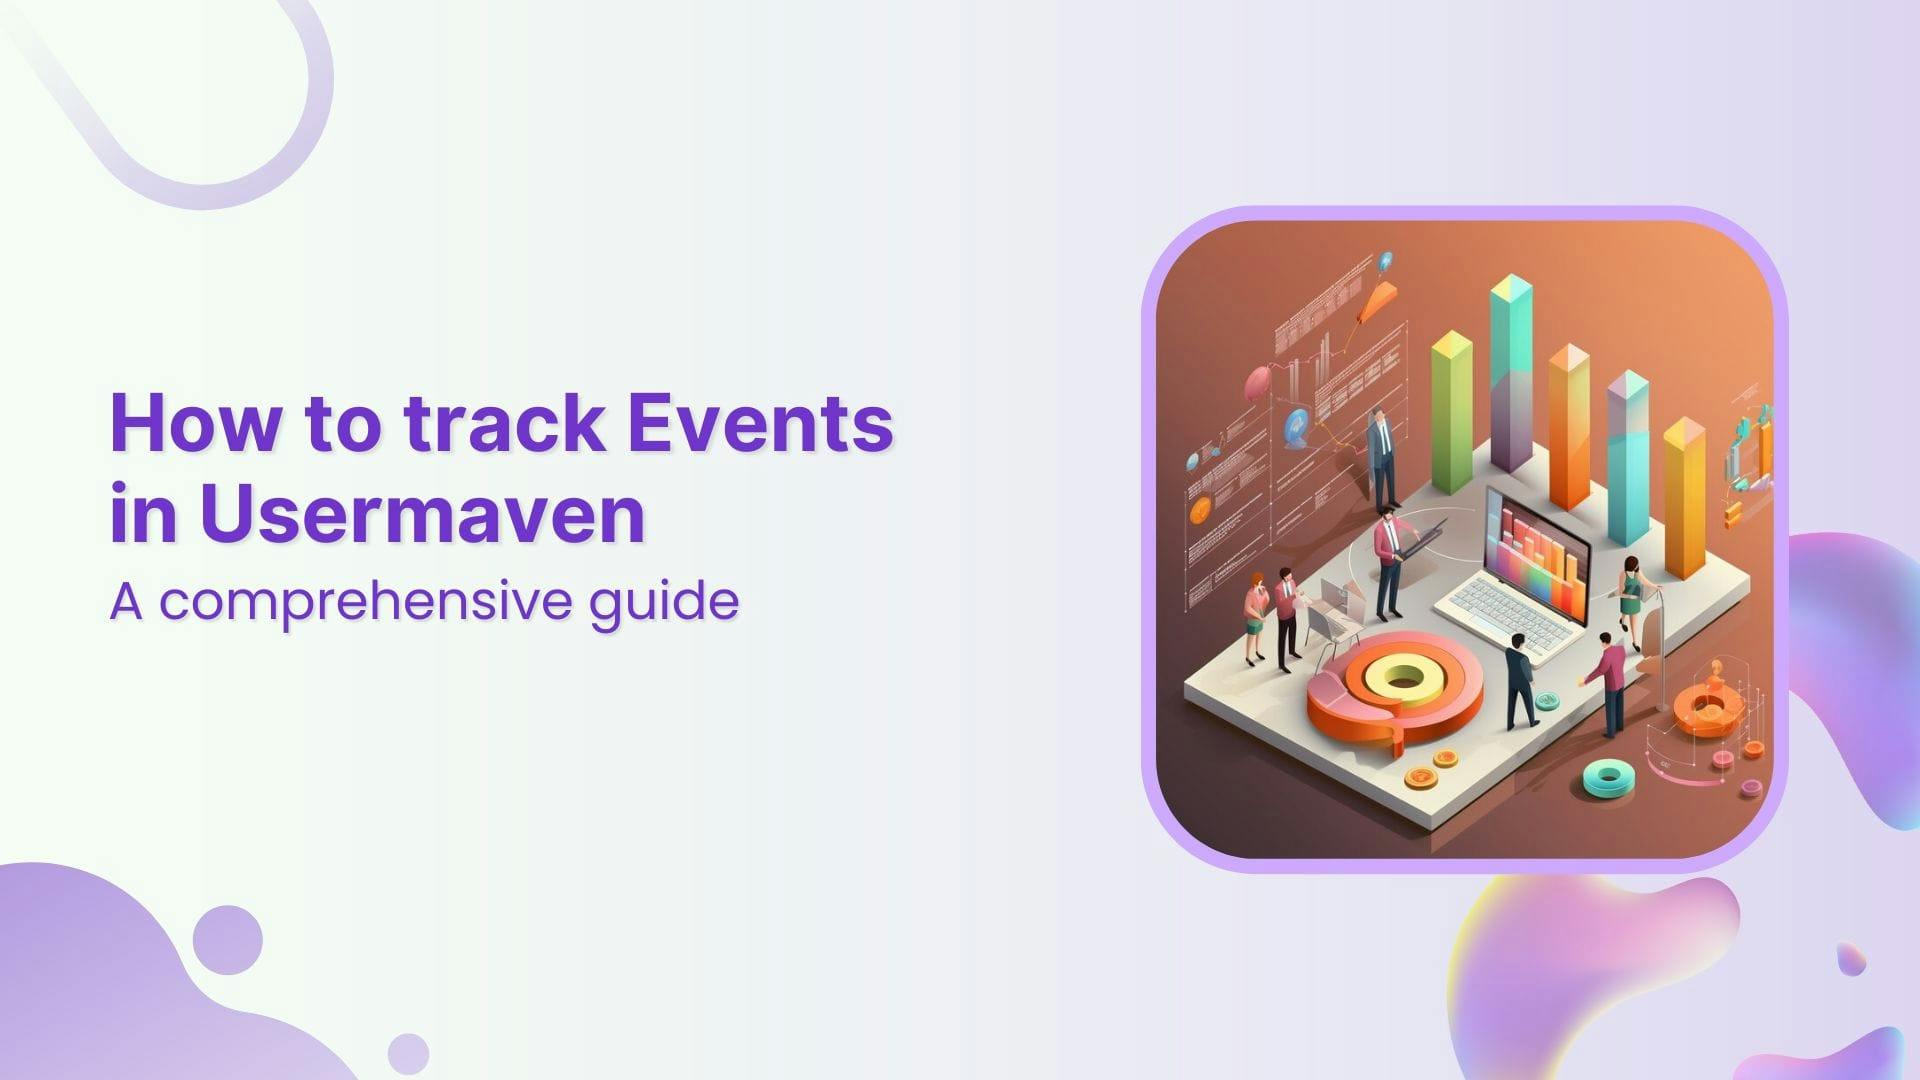 Track Events in Usermaven